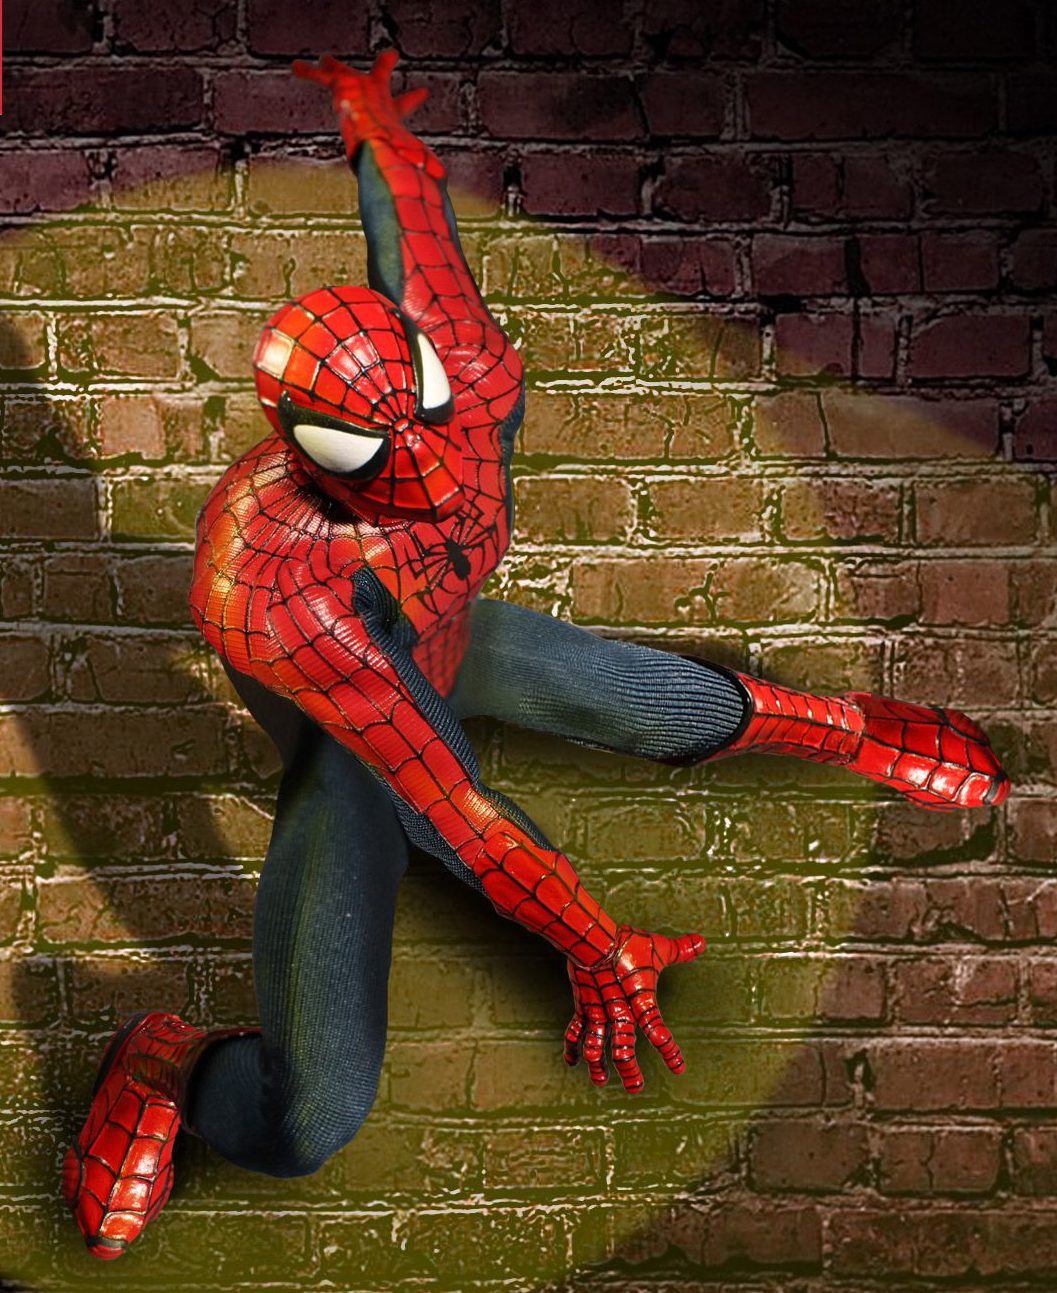 Mezco ONE:12 Collective Spider-Man Figure Up for Order! - Marvel Toy News